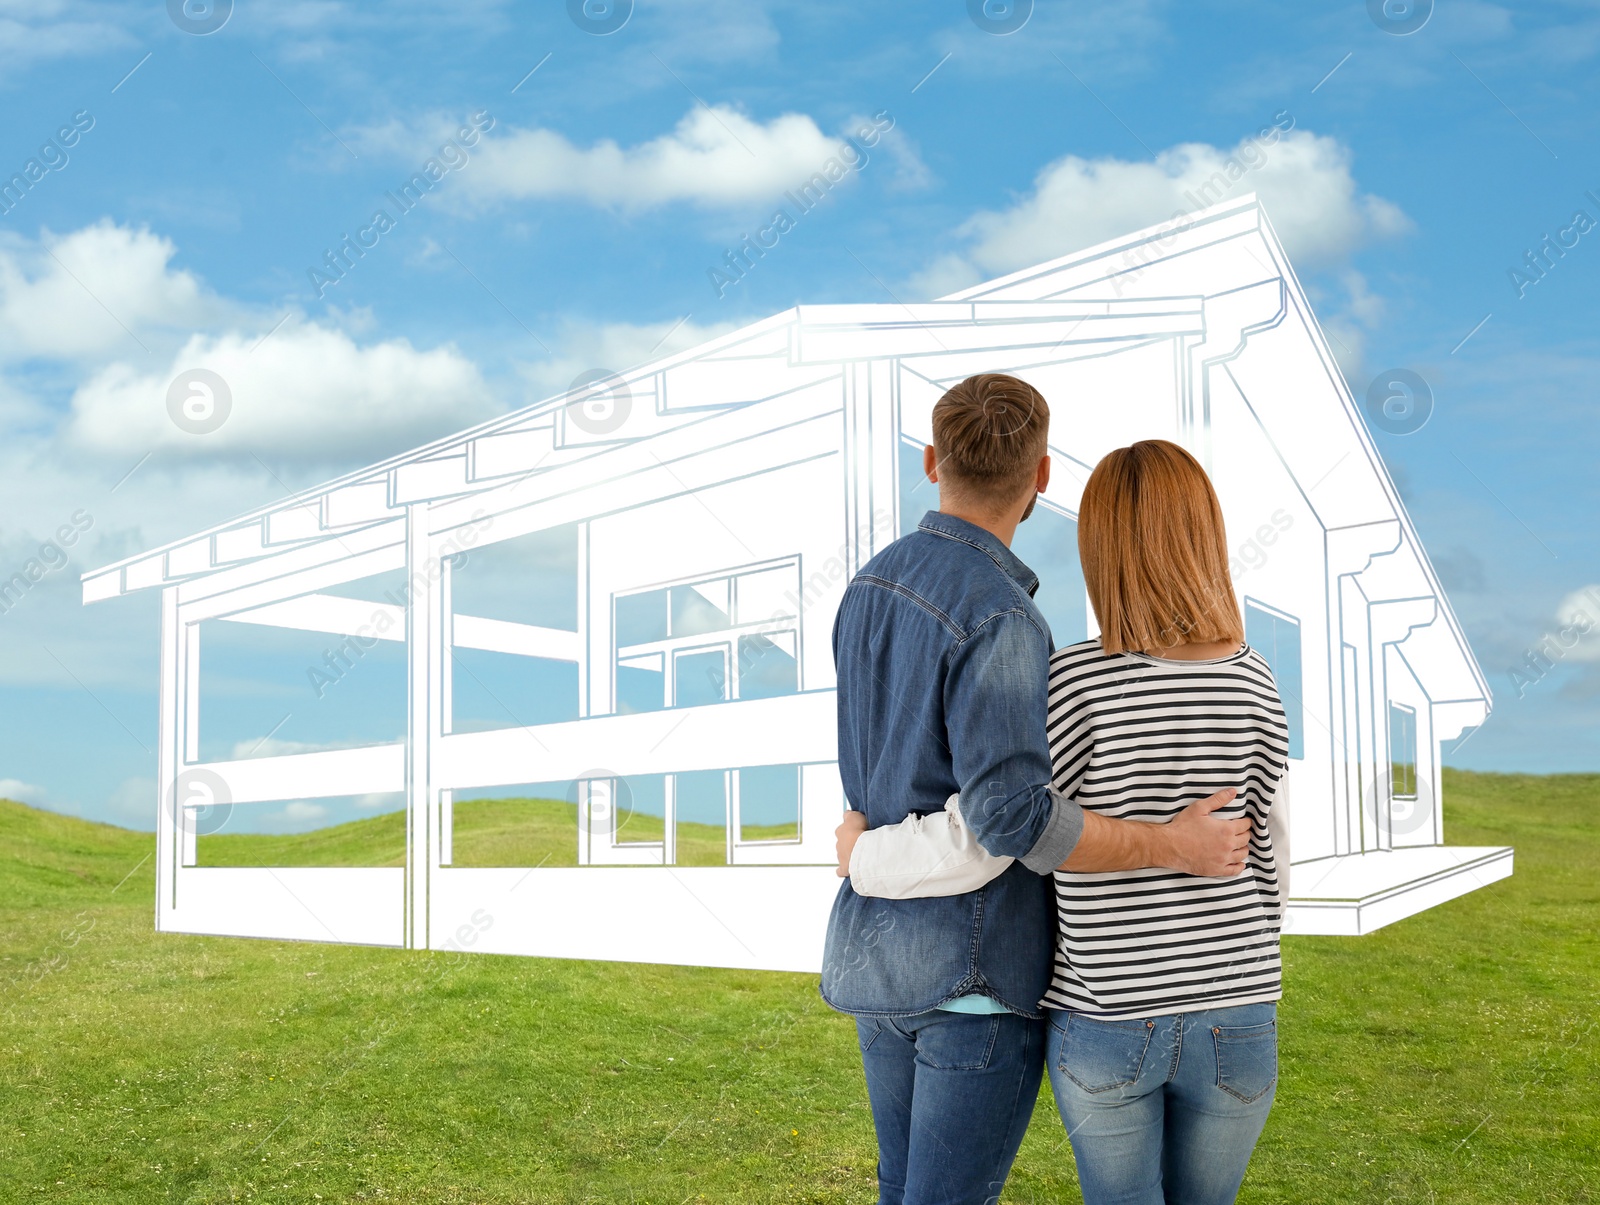 Image of Couple dreaming about future house. Landscape with building illustration